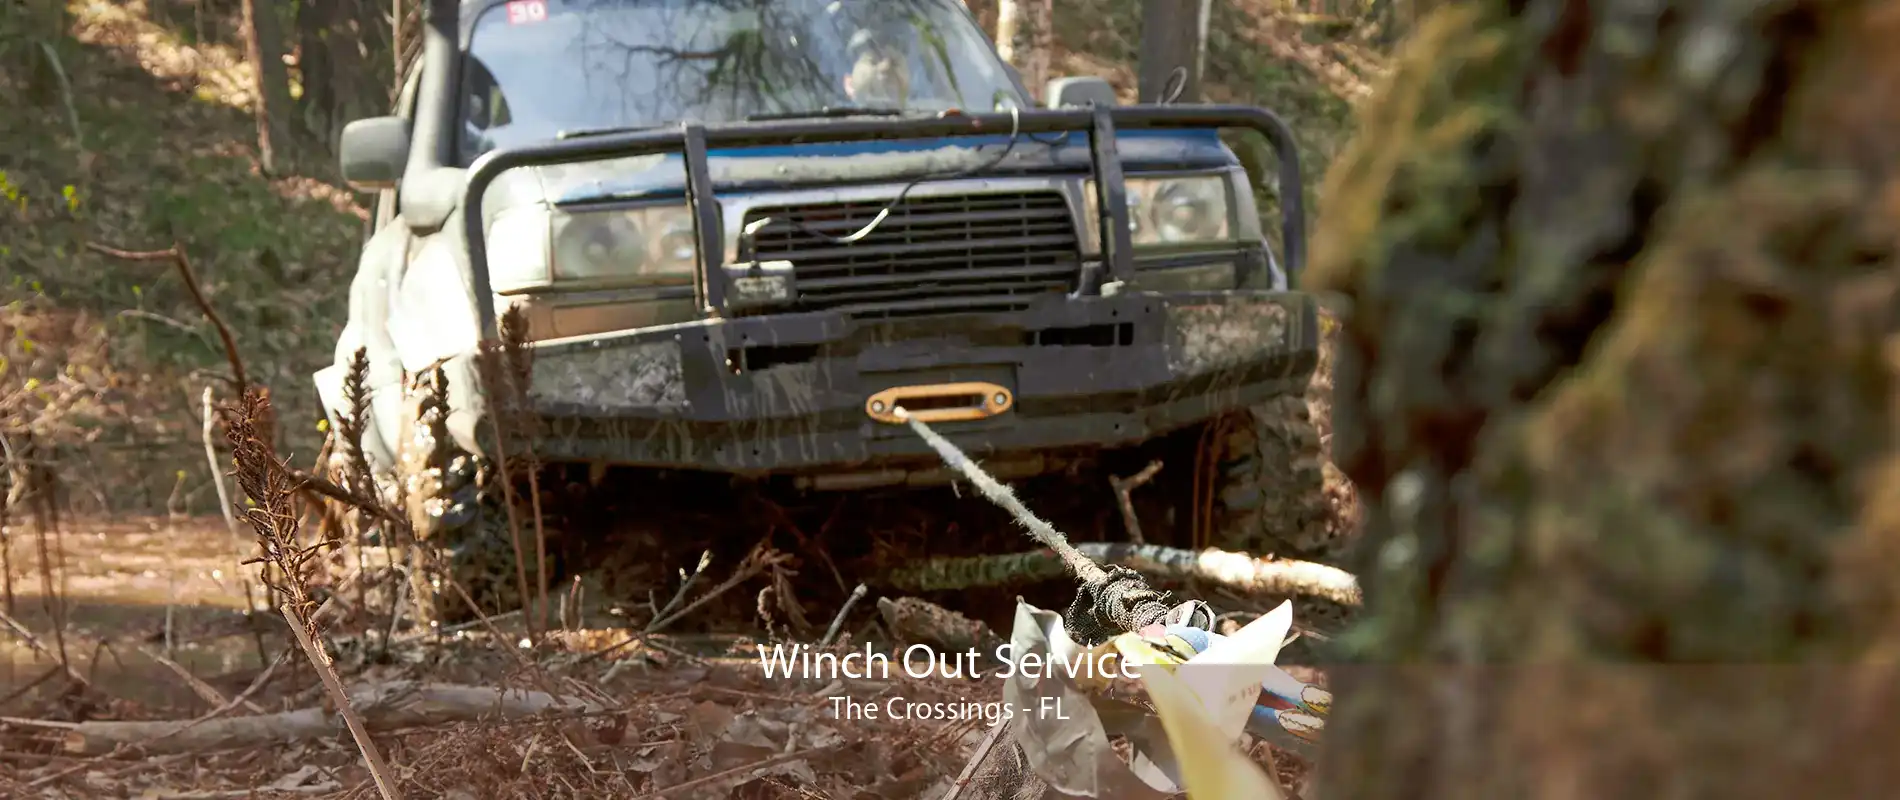 Winch Out Service The Crossings - FL